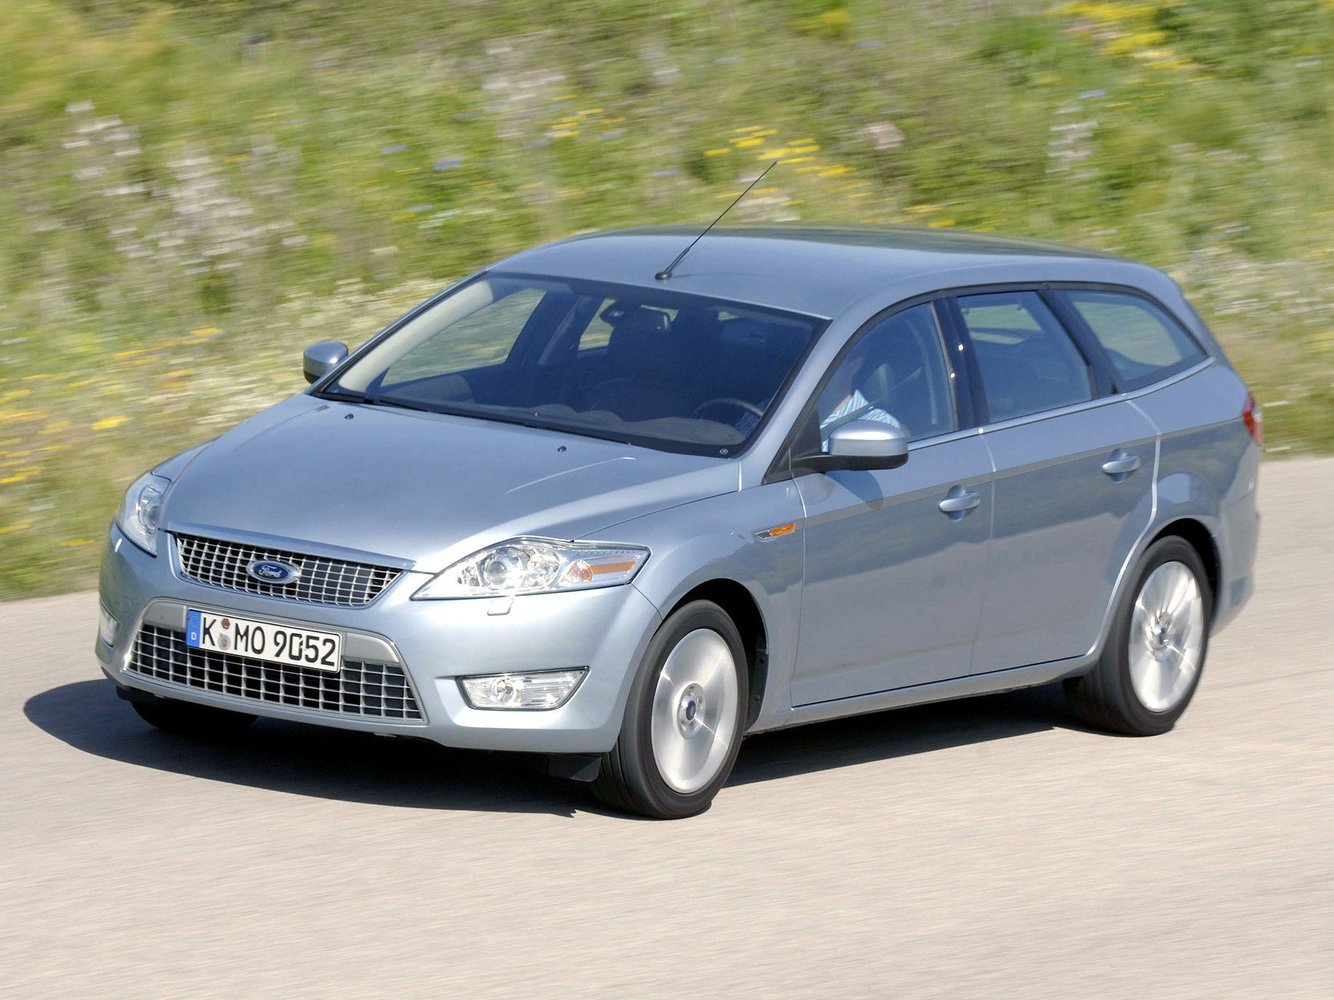 Ford Mondeo 2007 - 2010